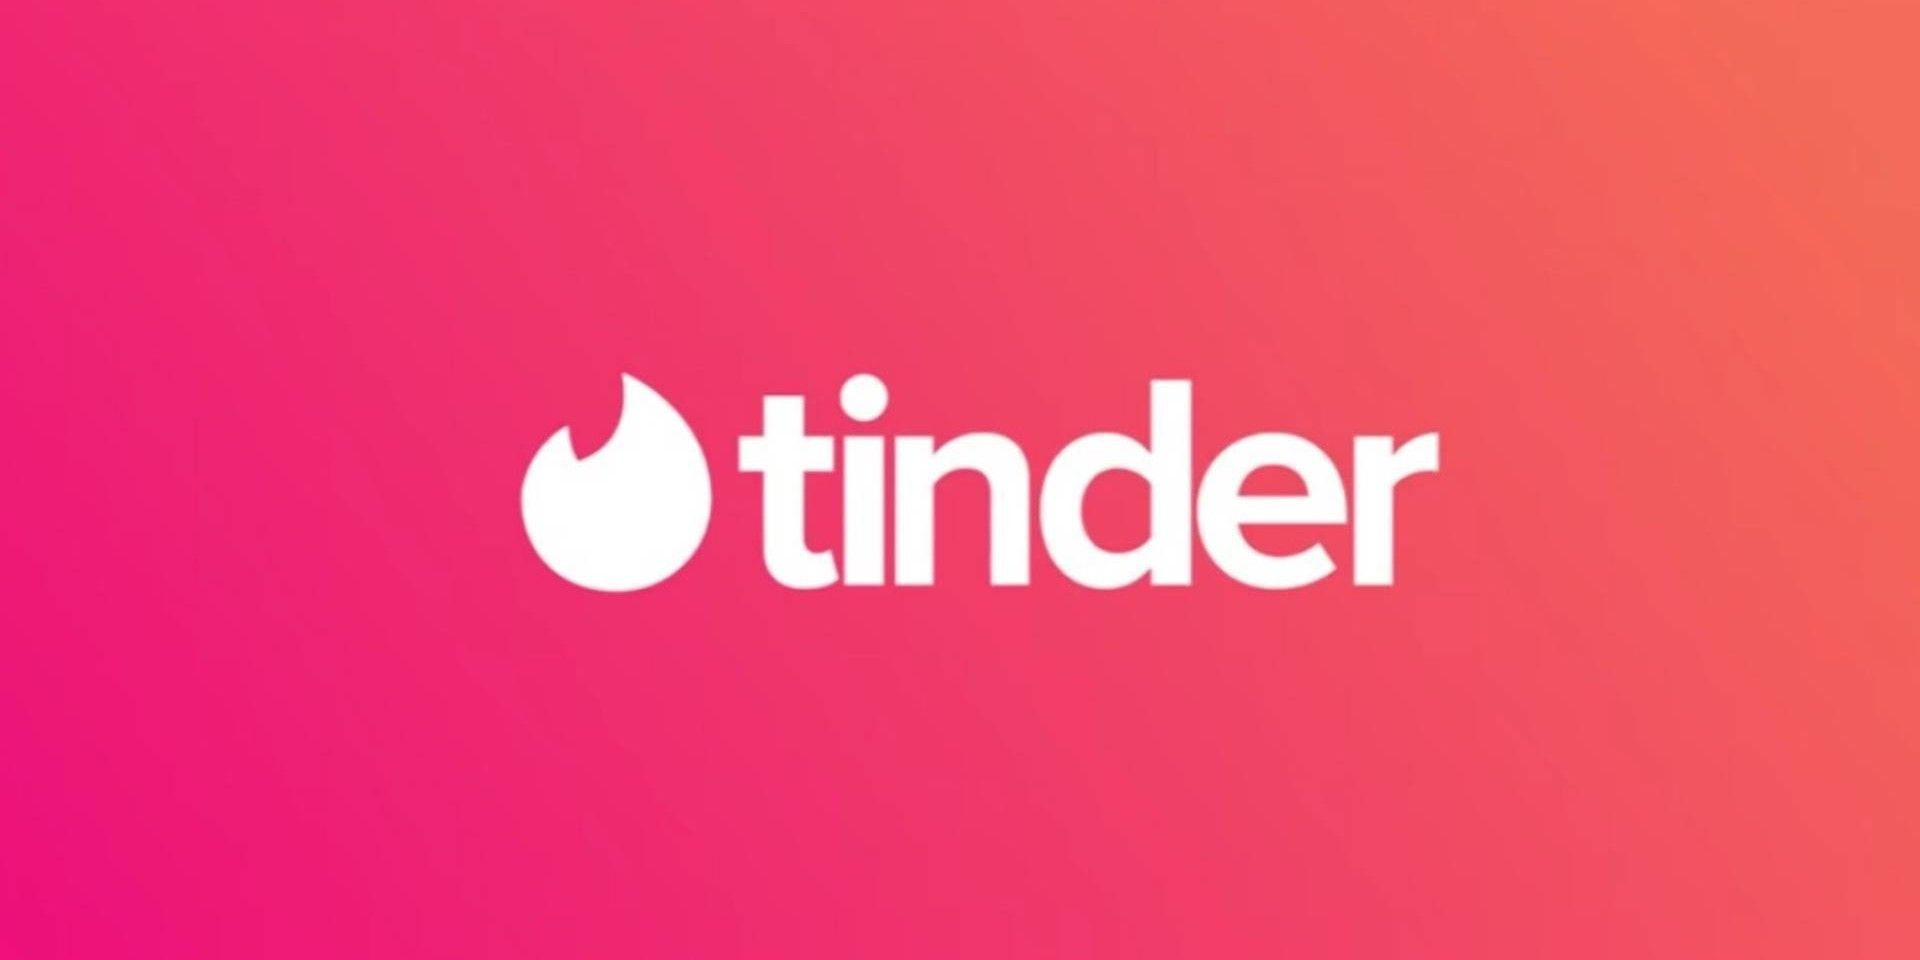 Tinder releases new 'Plus One' feature for wedding dates